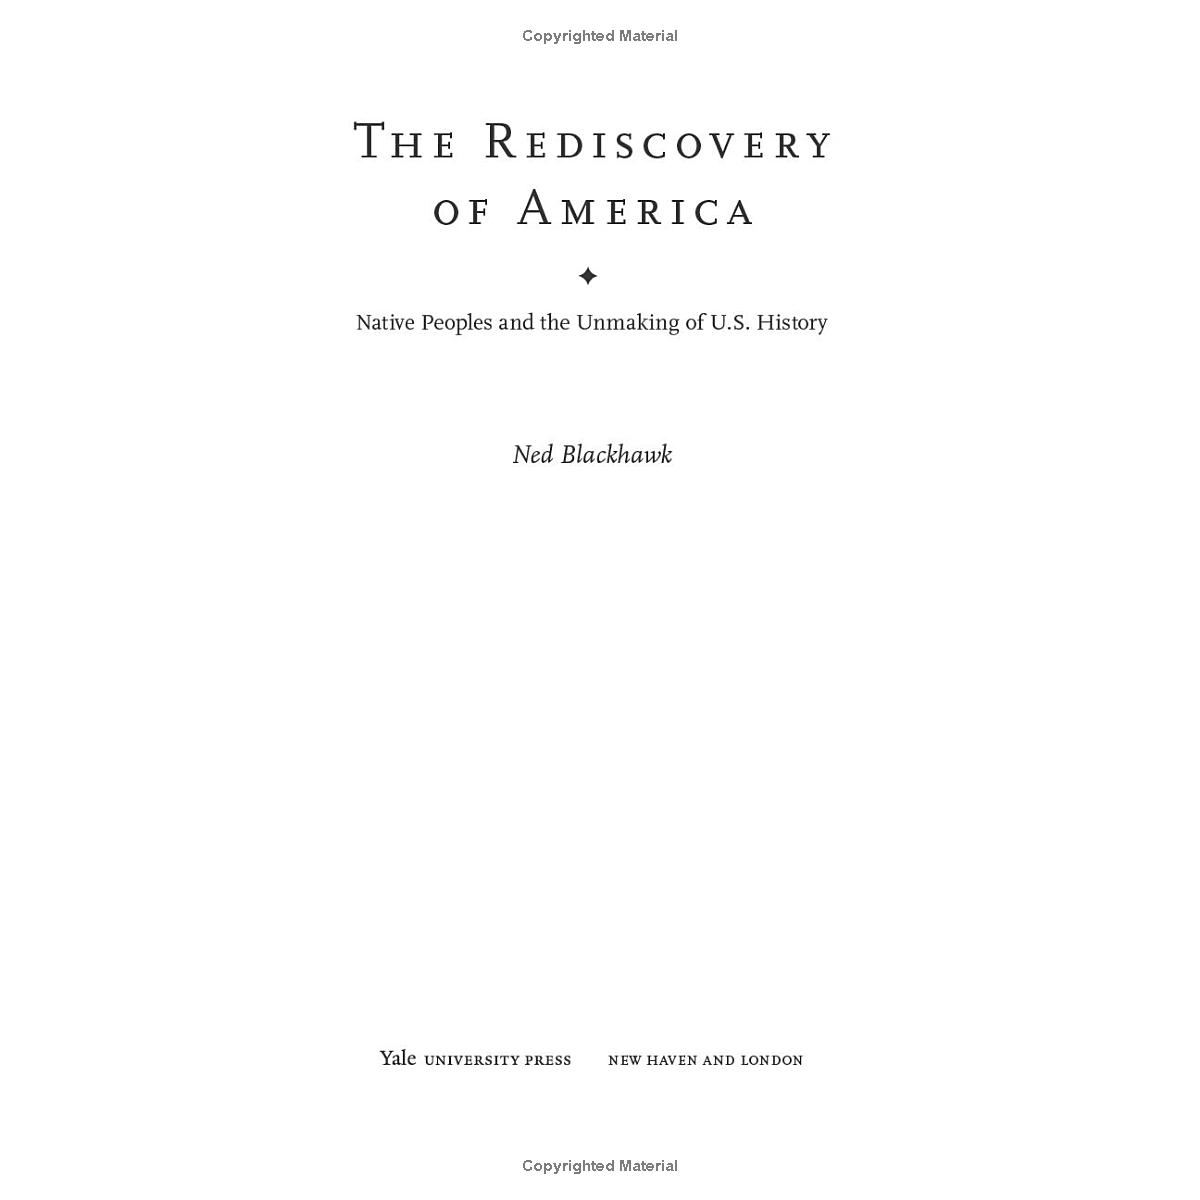 The Rediscovery of America: Native Peoples and the Unmaking of American History by Ned Blackhawk - WHA Winner 2024